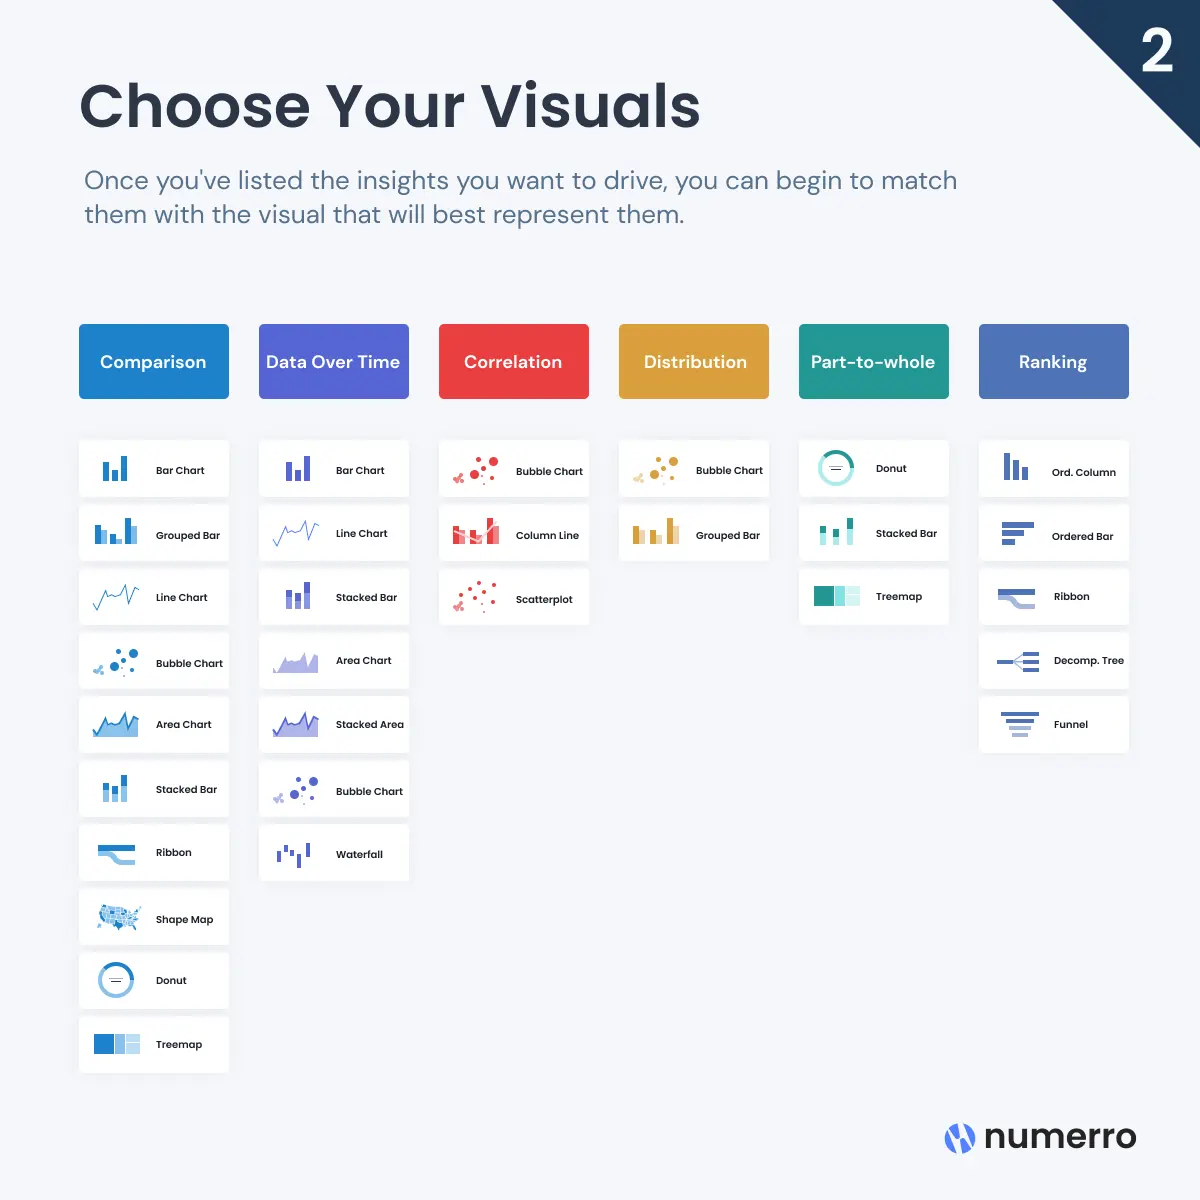 Tips for choosing visualization